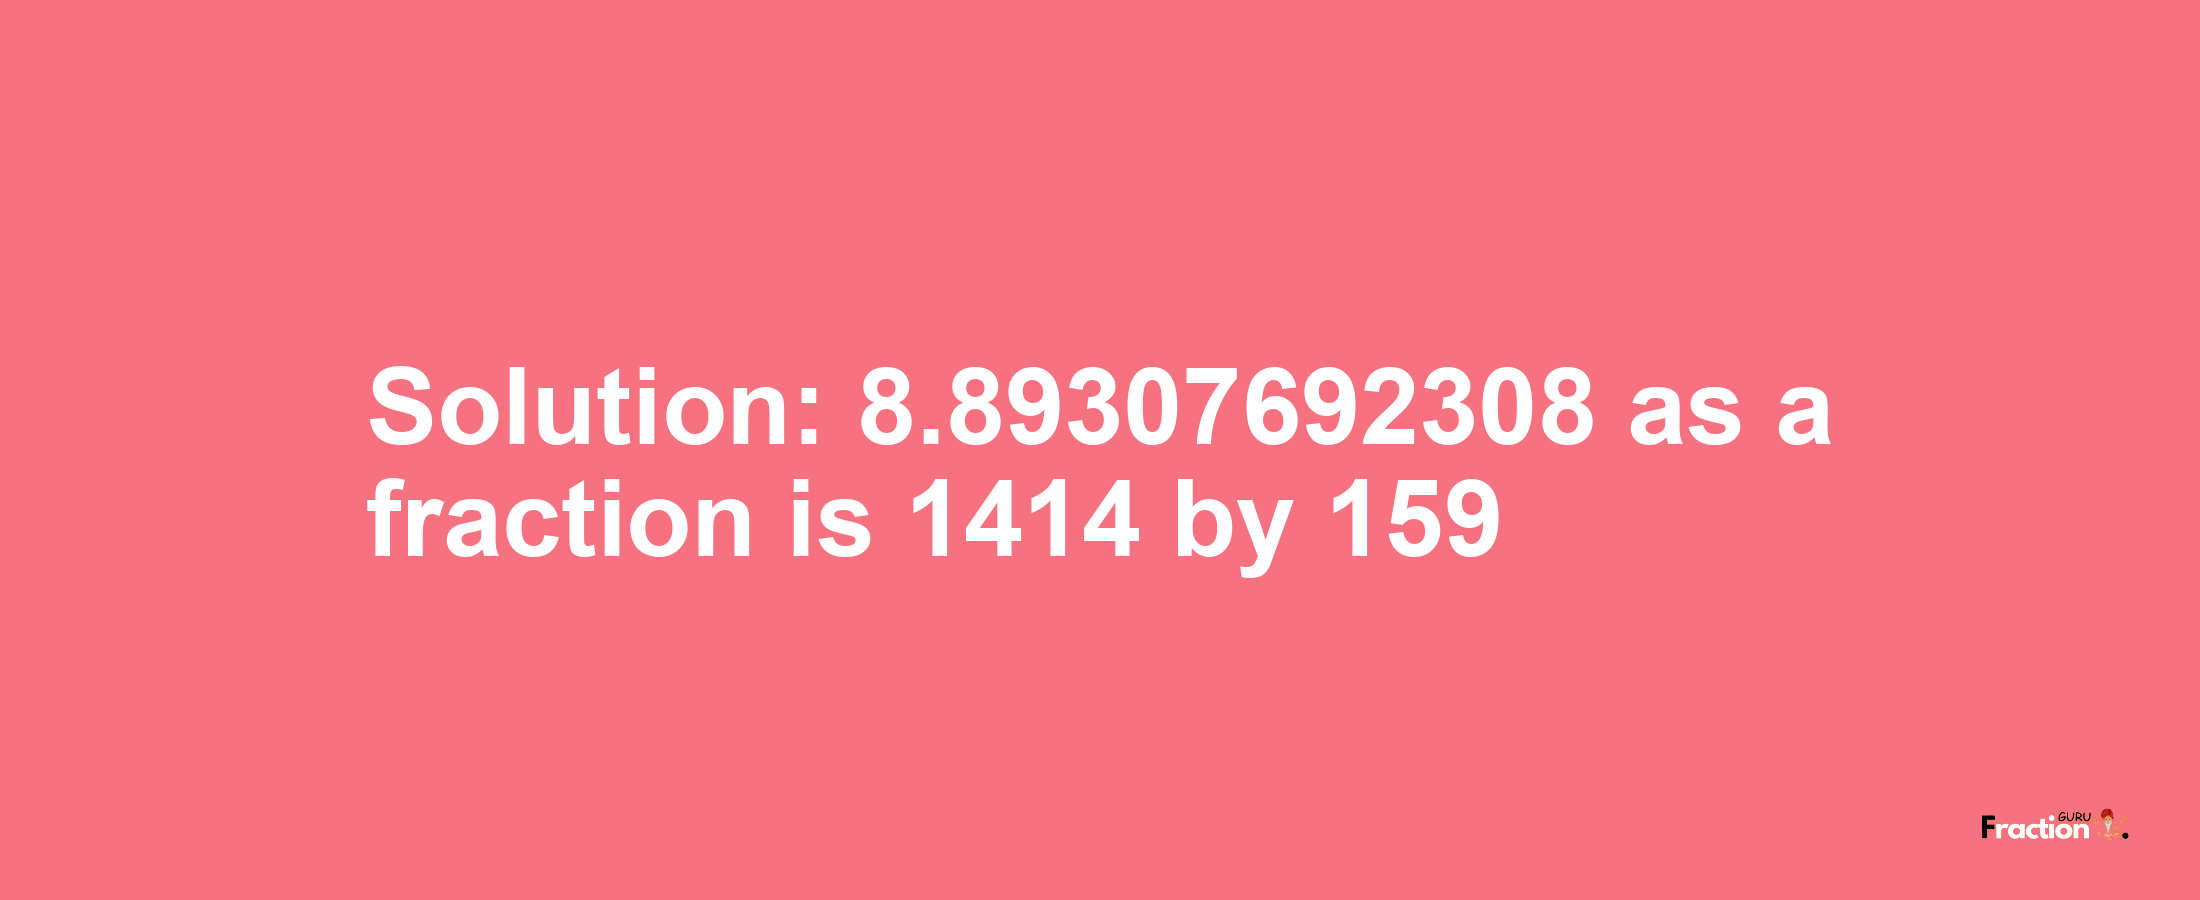 Solution:8.89307692308 as a fraction is 1414/159